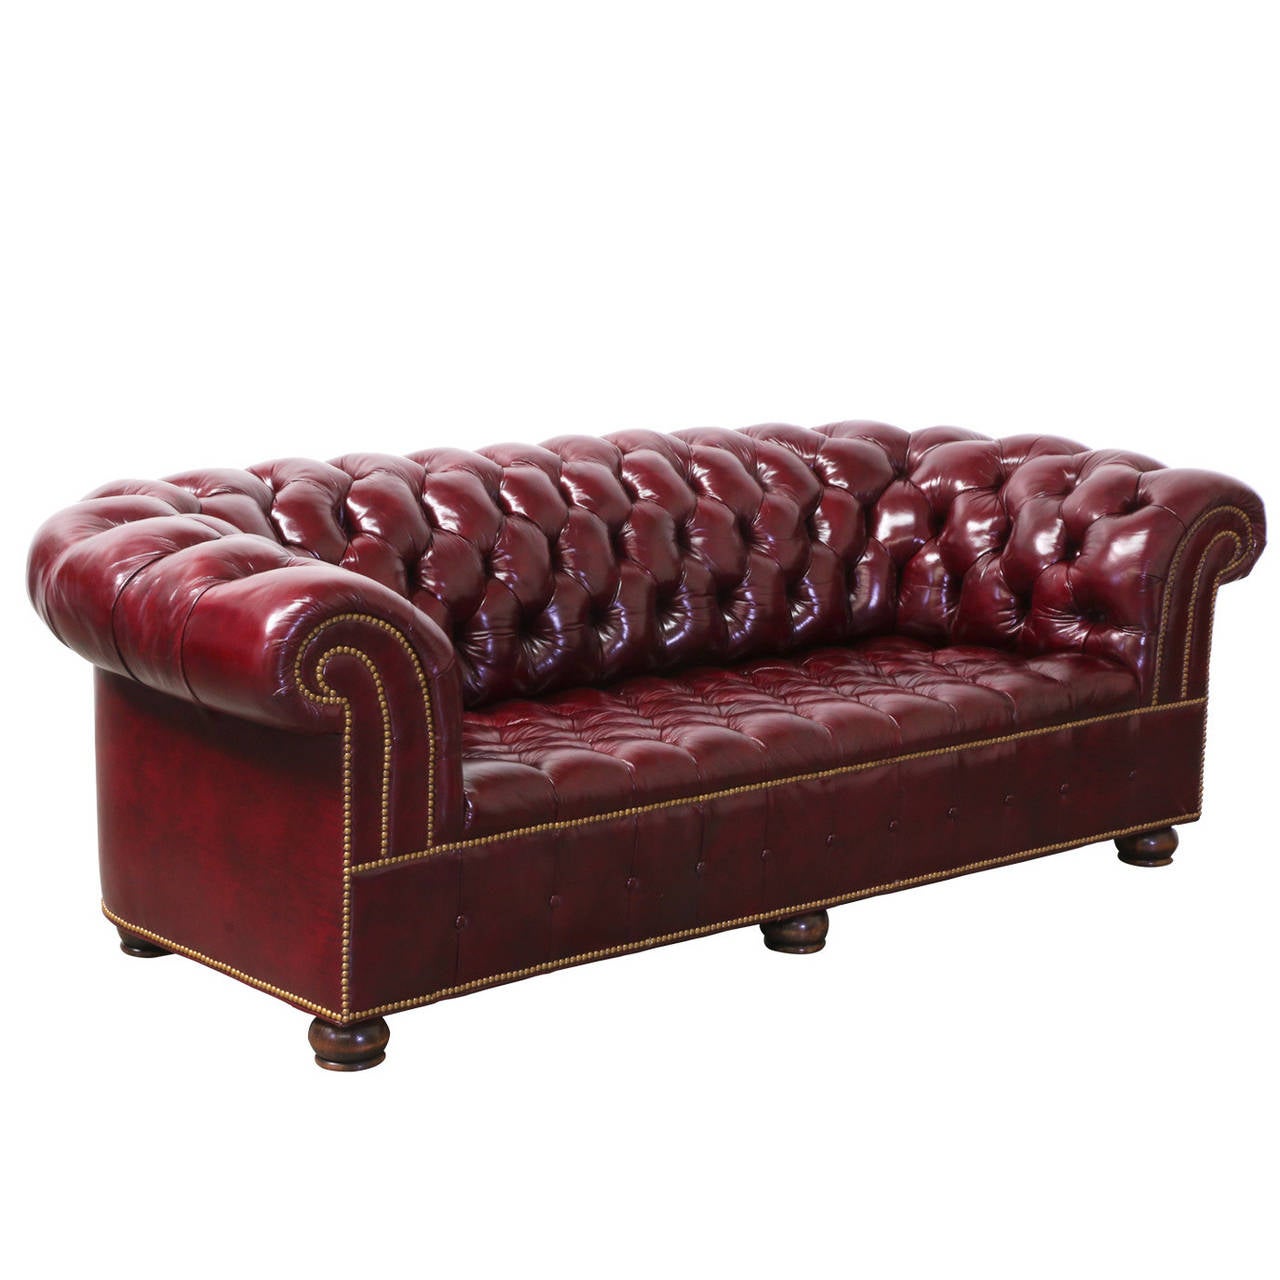 Vintage Burgundy Leather Chesterfield Sofa At 1stdibs